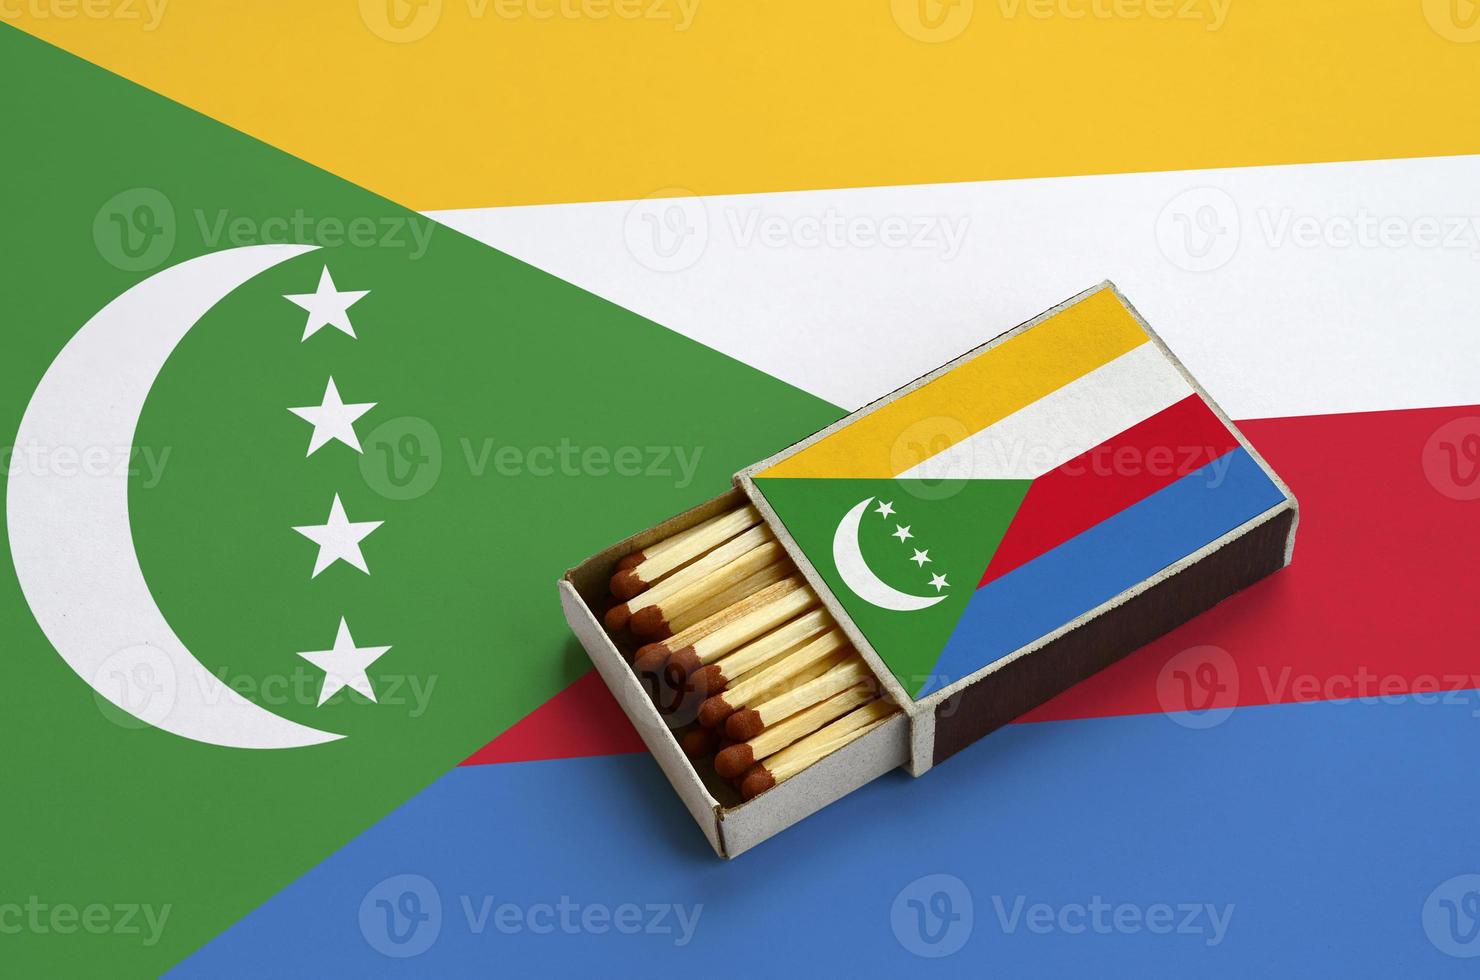 Comoros flag  is shown in an open matchbox, which is filled with matches and lies on a large flag photo